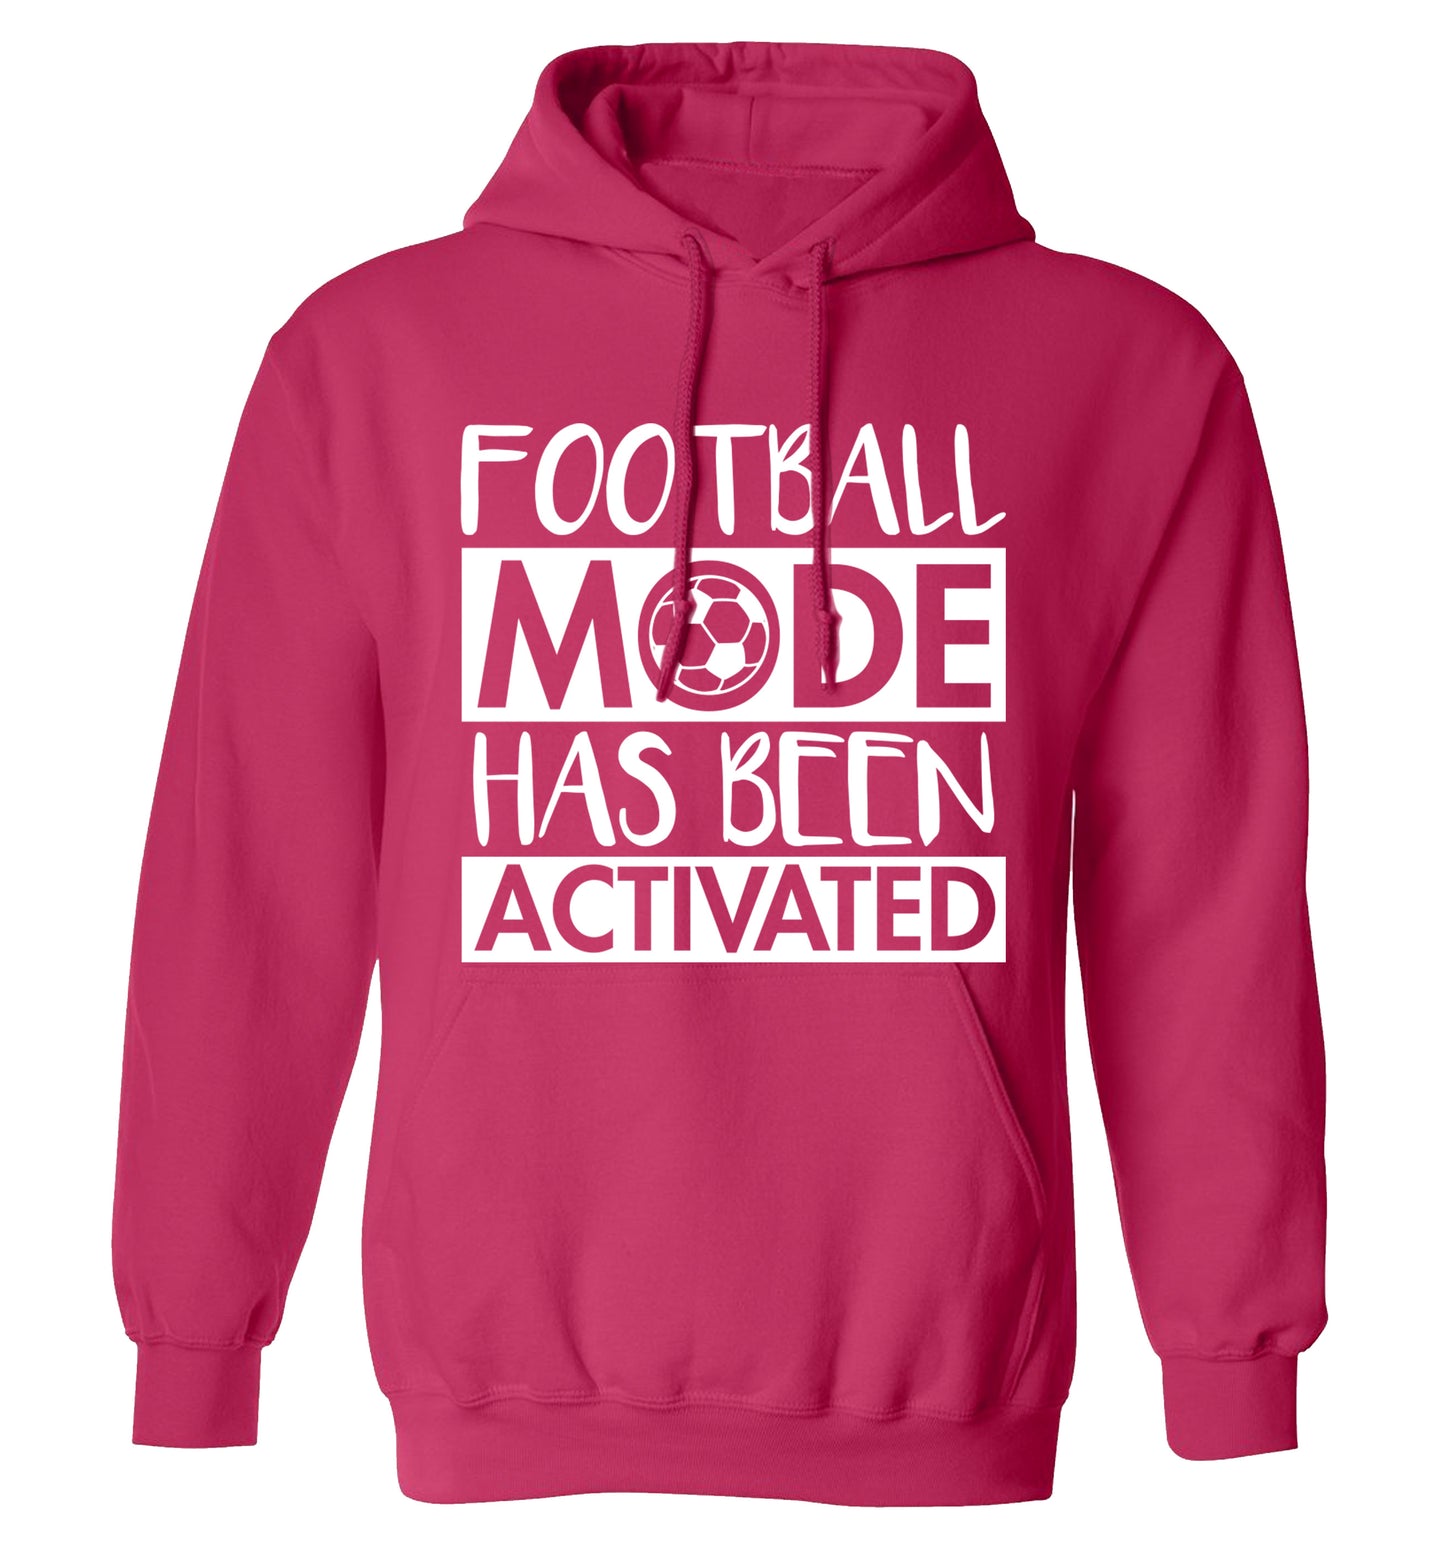 Football mode has been activated adults unisexpink hoodie 2XL